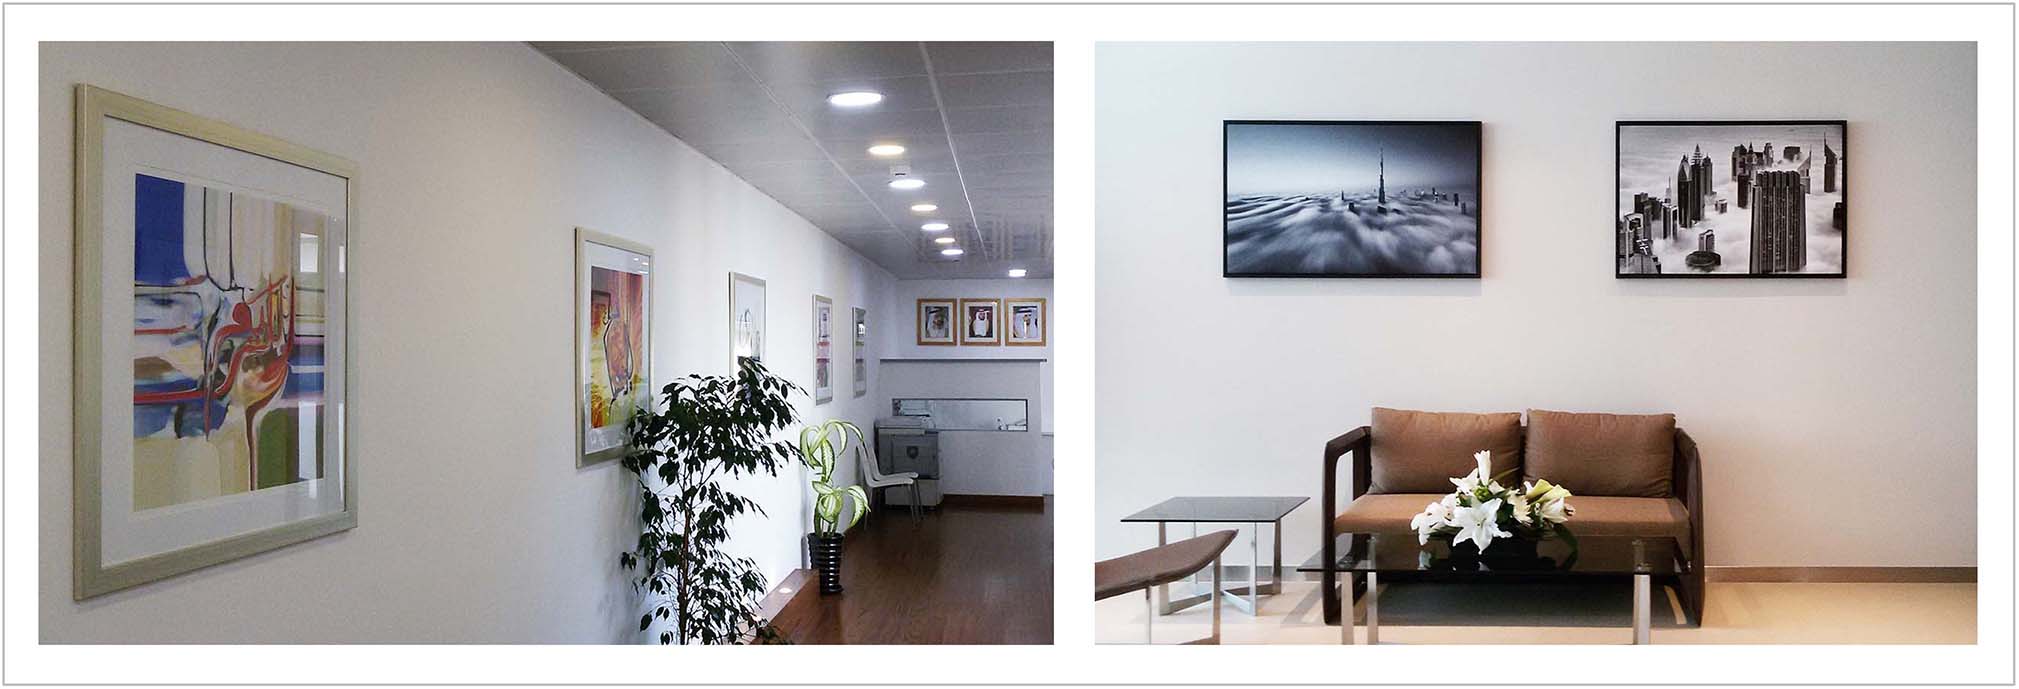 Office decoration examples